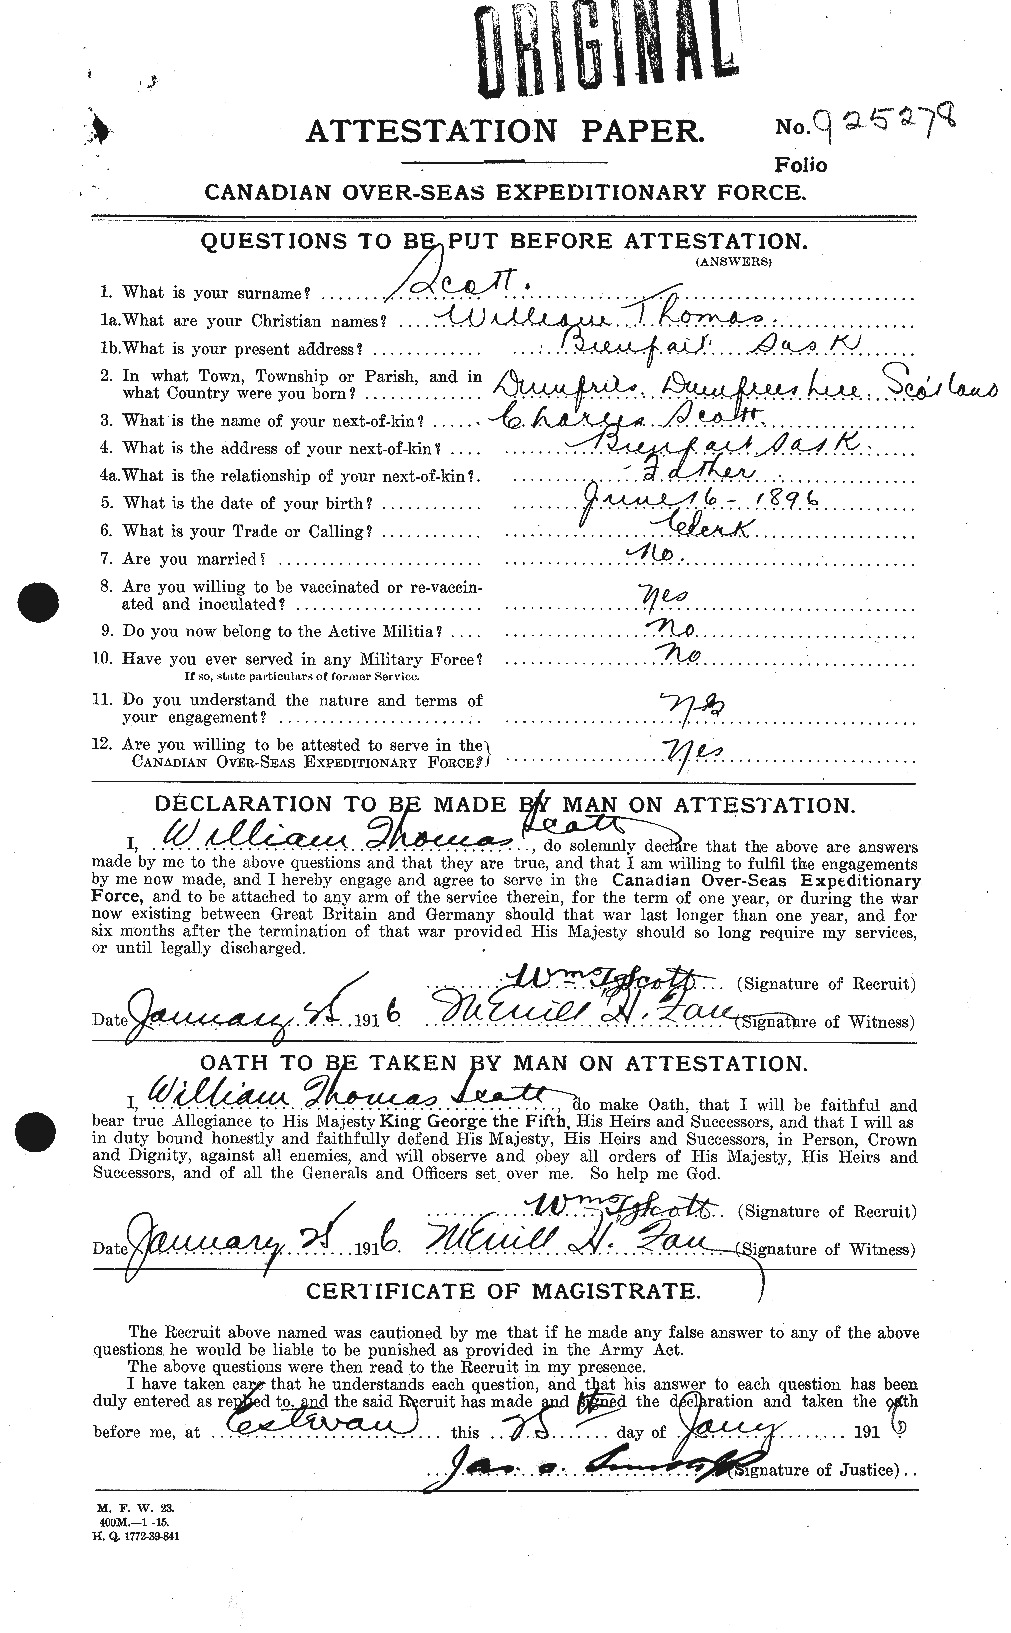 Personnel Records of the First World War - CEF 087255a